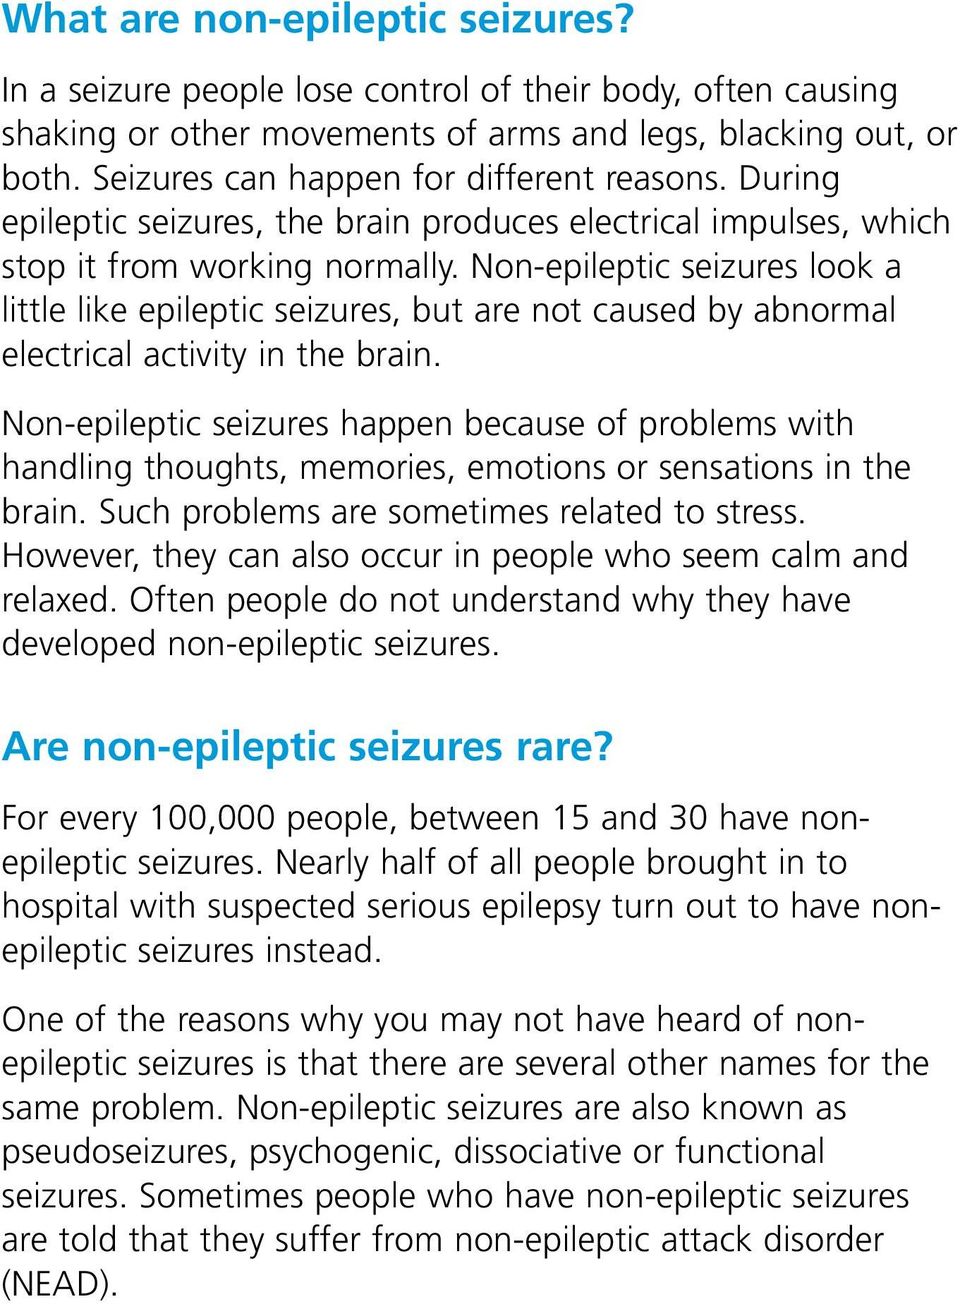 Non-epileptic seizures look a little like epileptic seizures, but are not caused by abnormal electrical activity in the brain.